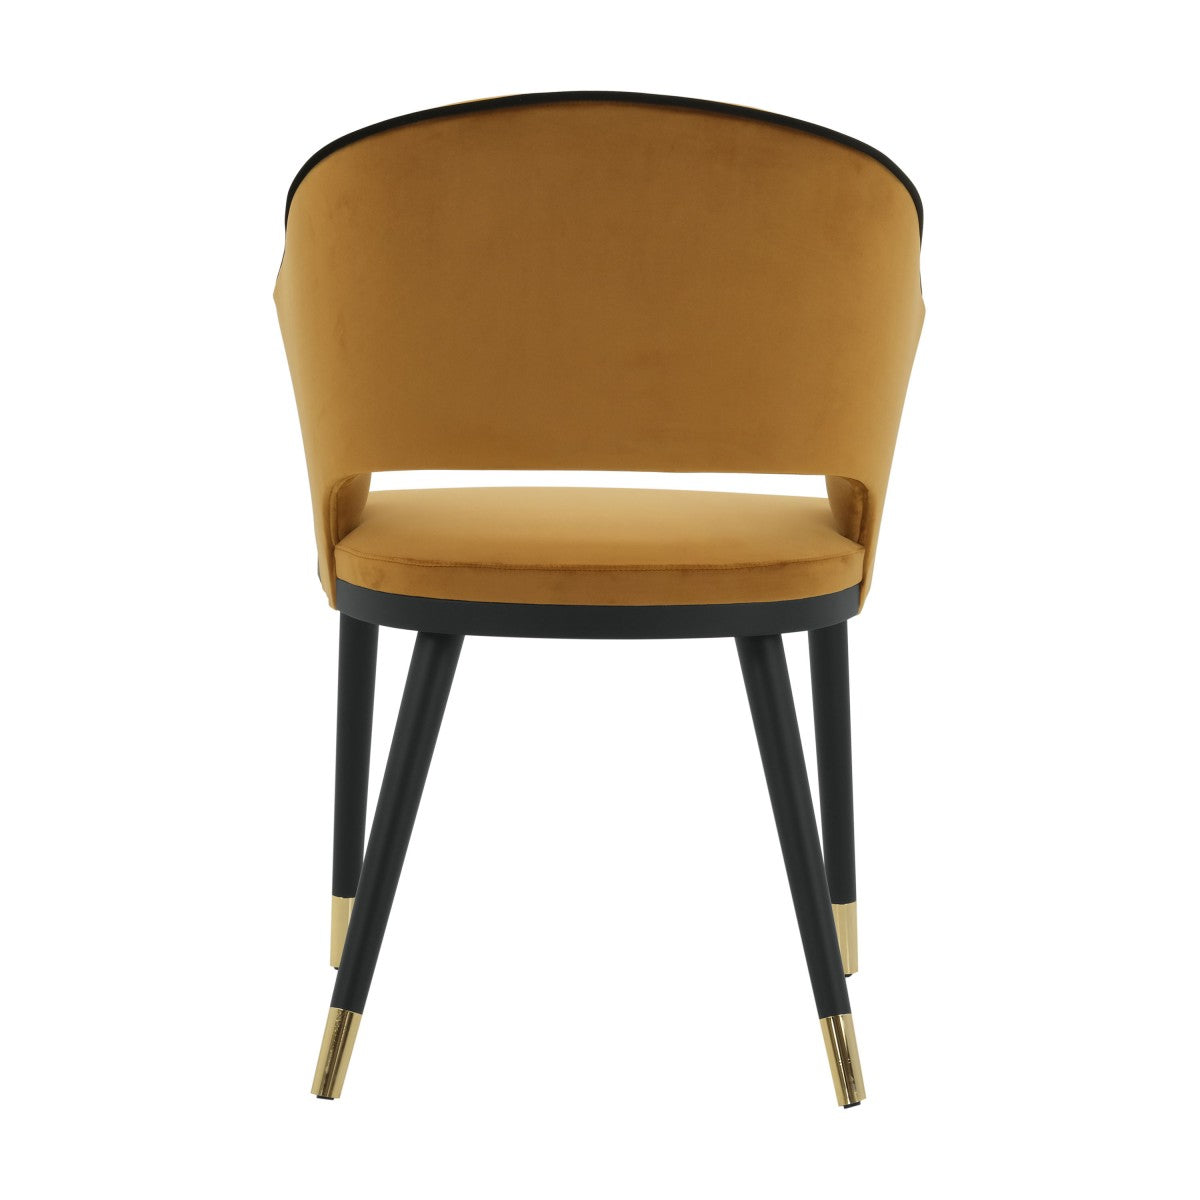 Cannes Bespoke Upholstered Modern Contemporary Dining Chair MS658S Custom Made To Order